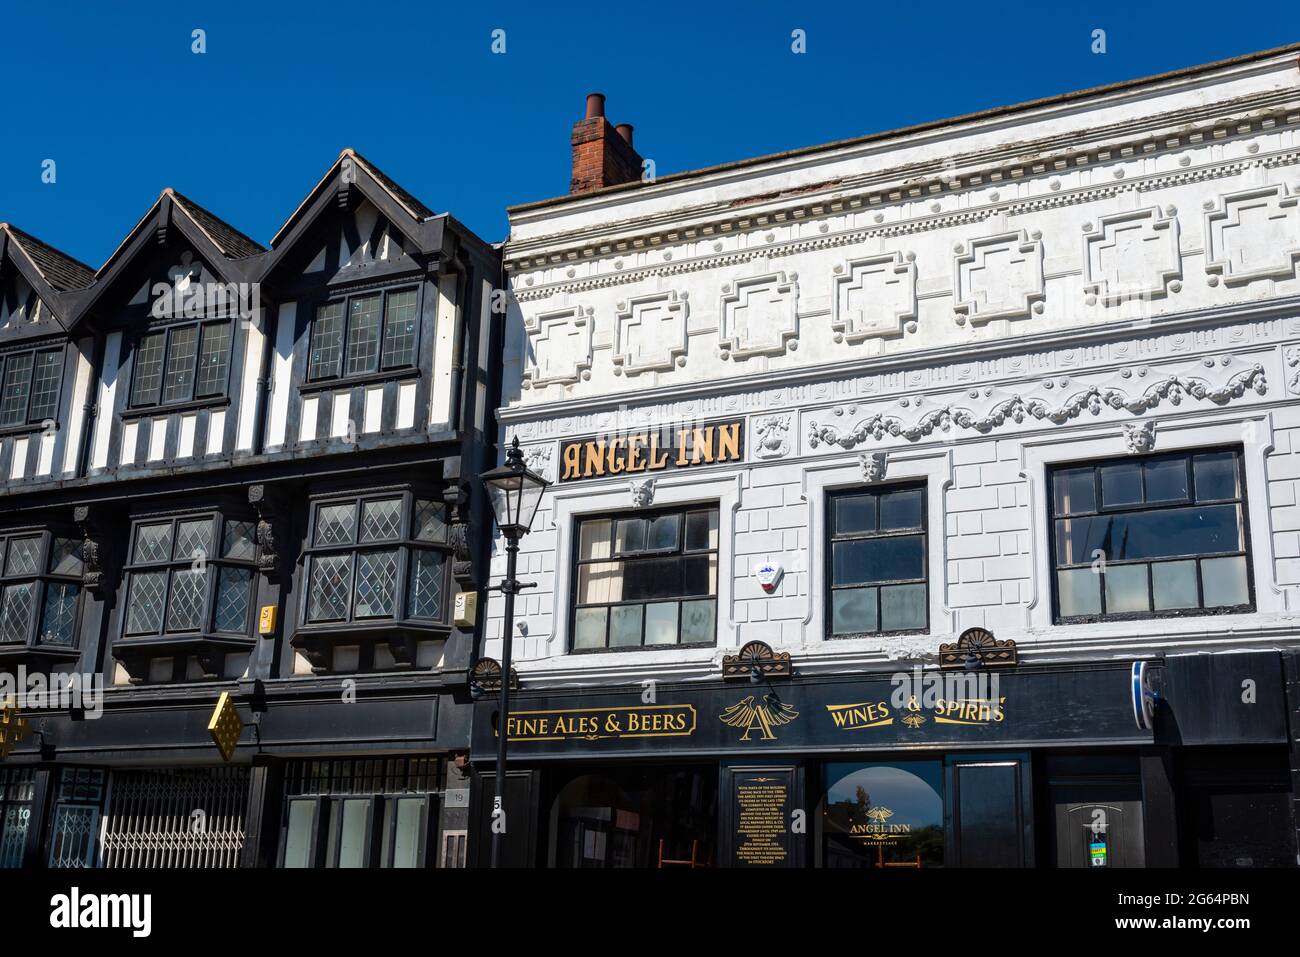 Angel Inn situated in the market place in Stockport town centre, Greater Manchester, England. Stock Photo